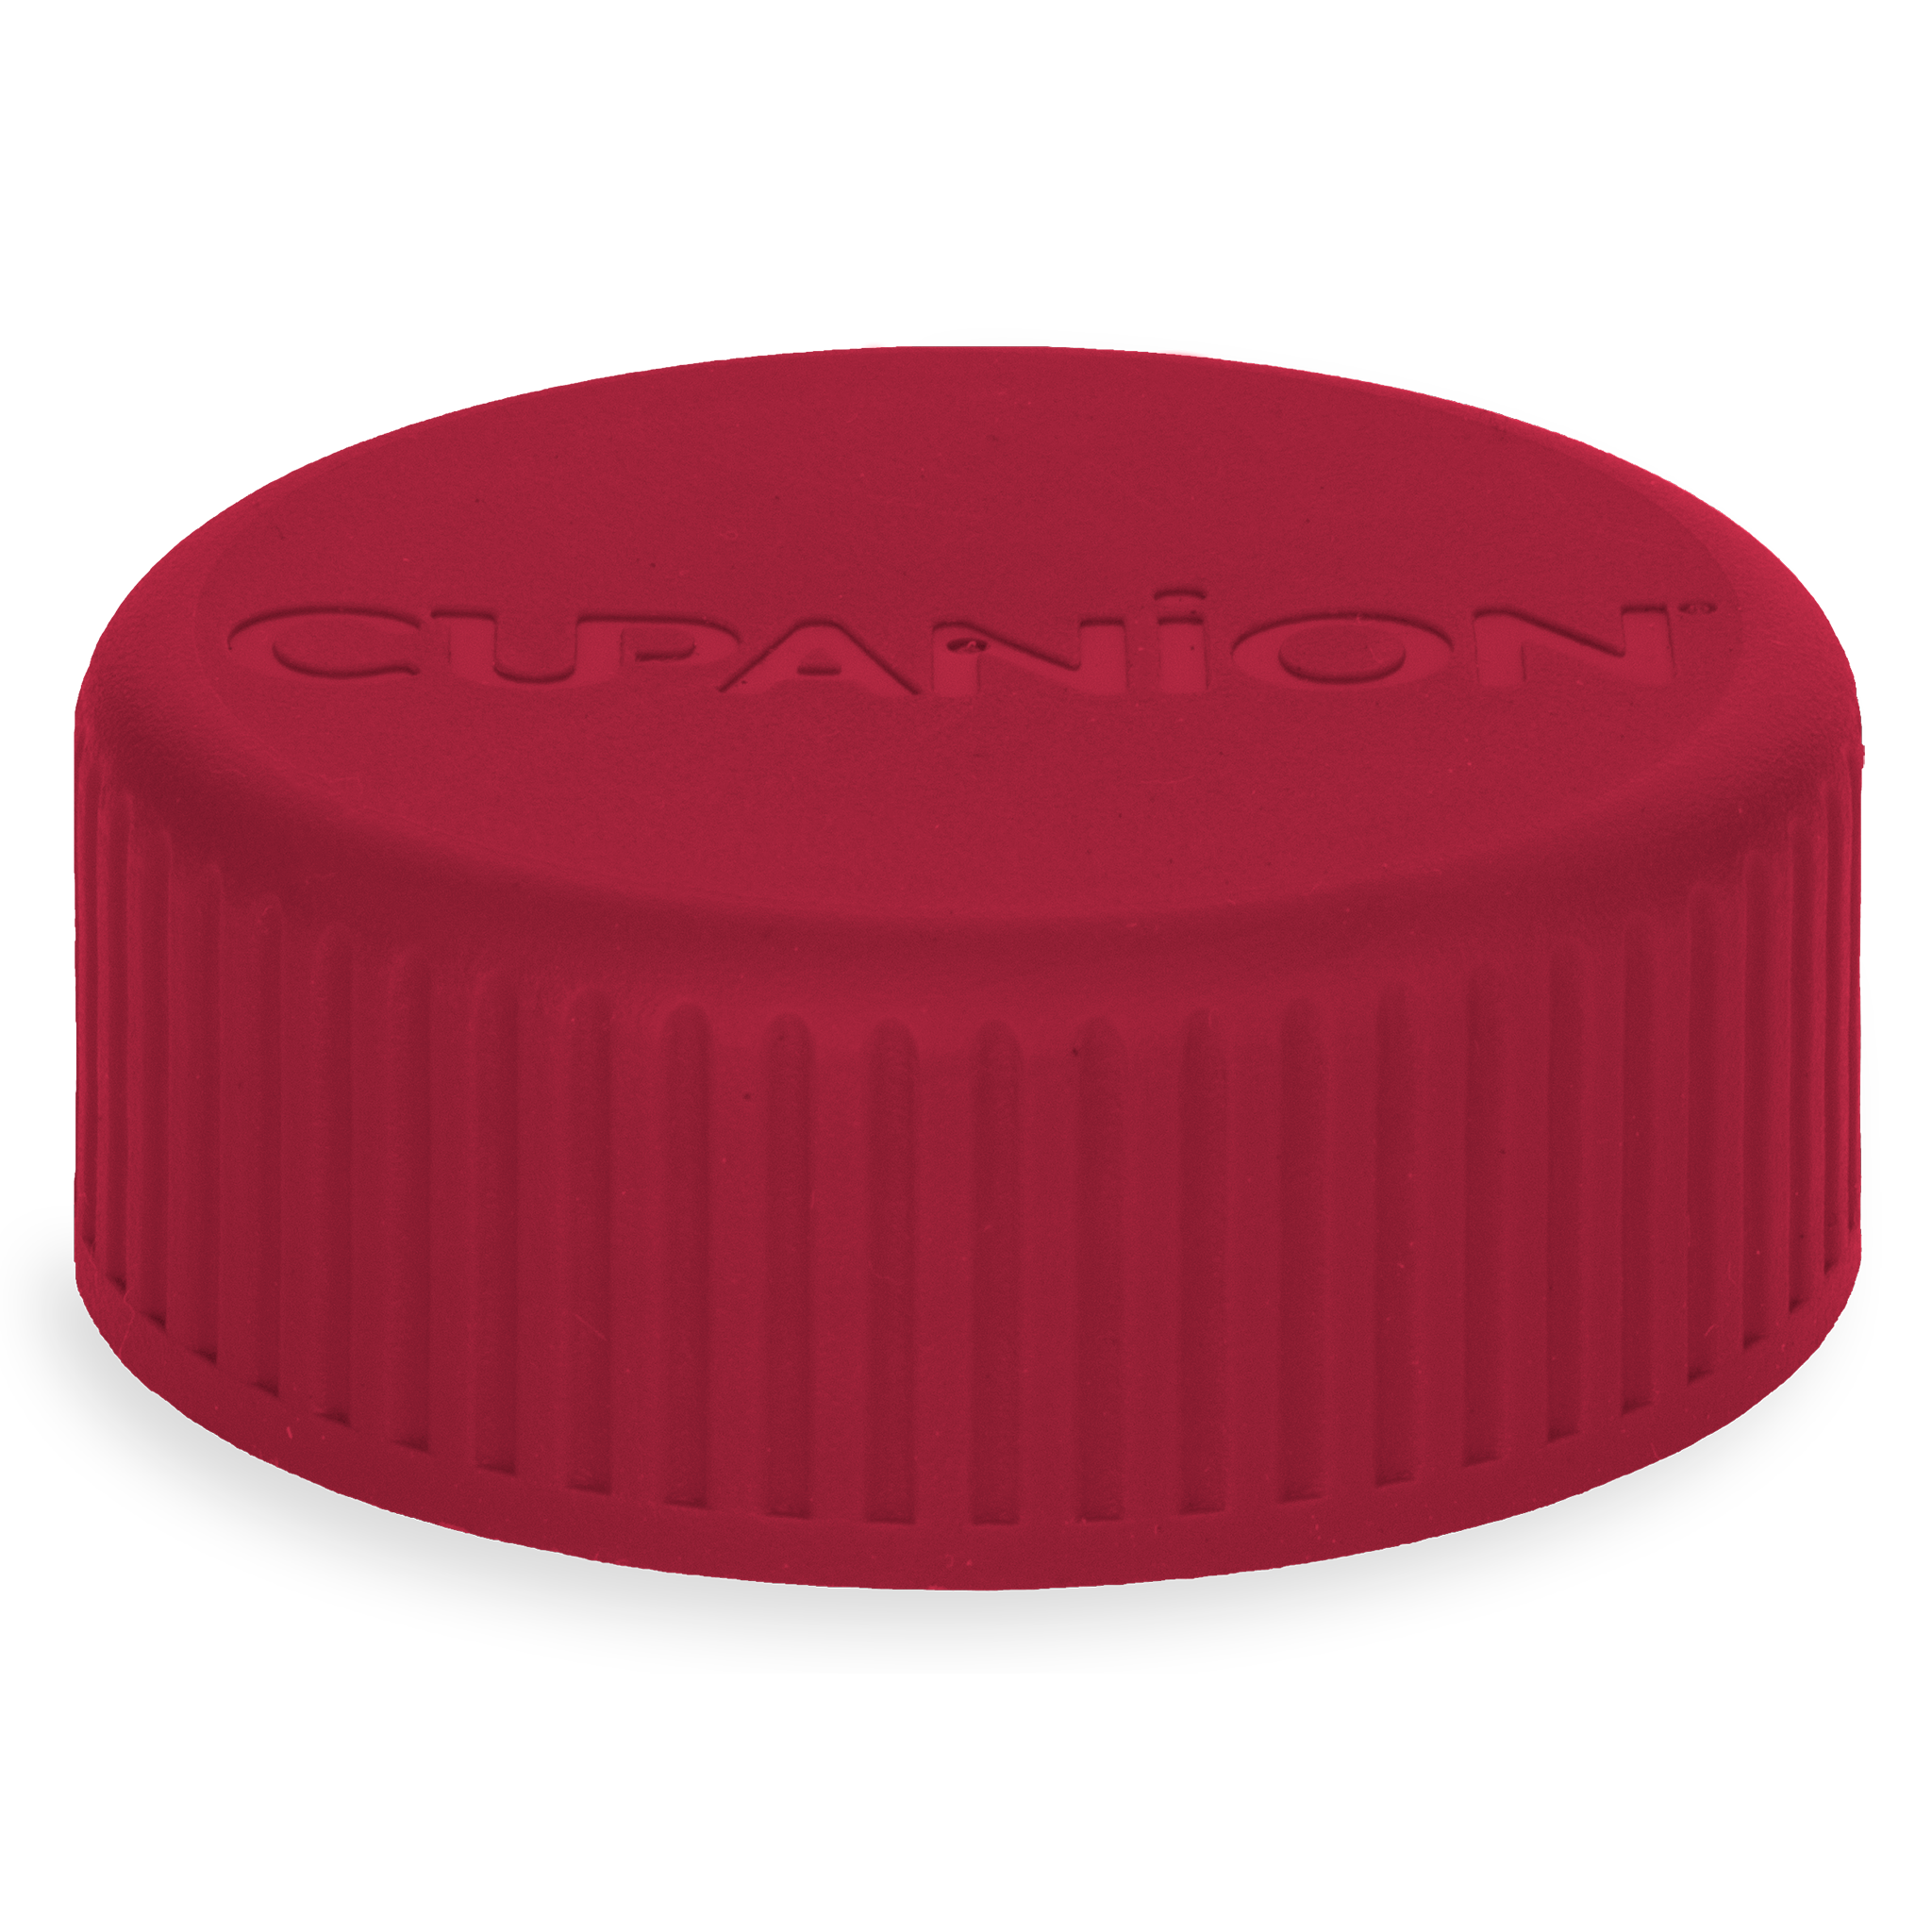 Raspberry Red - Cupanion Reusable Water Bottle Lid